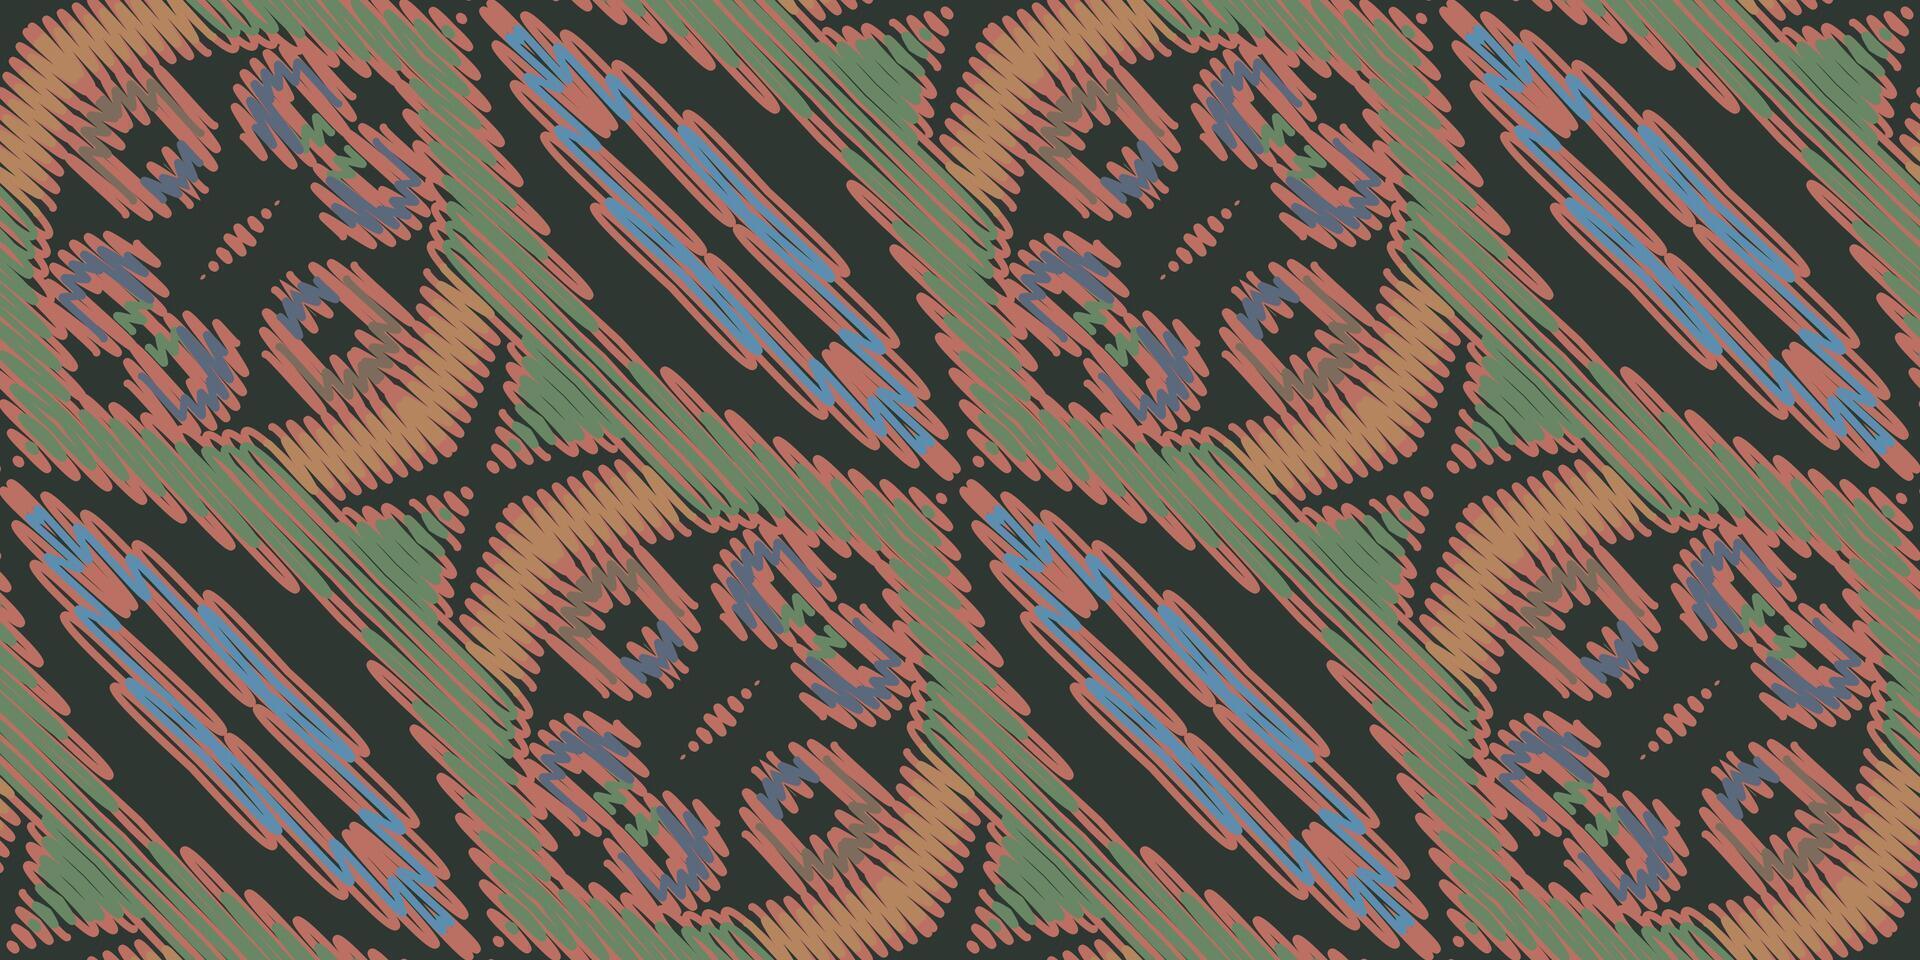 African Ikat Paisley Embroidery. Geometric Ethnic Oriental Seamless Pattern Traditional Background. Aztec Style Abstract Vector Illustration. Design for Texture, Fabric, Clothing, Wrapping, Carpet.